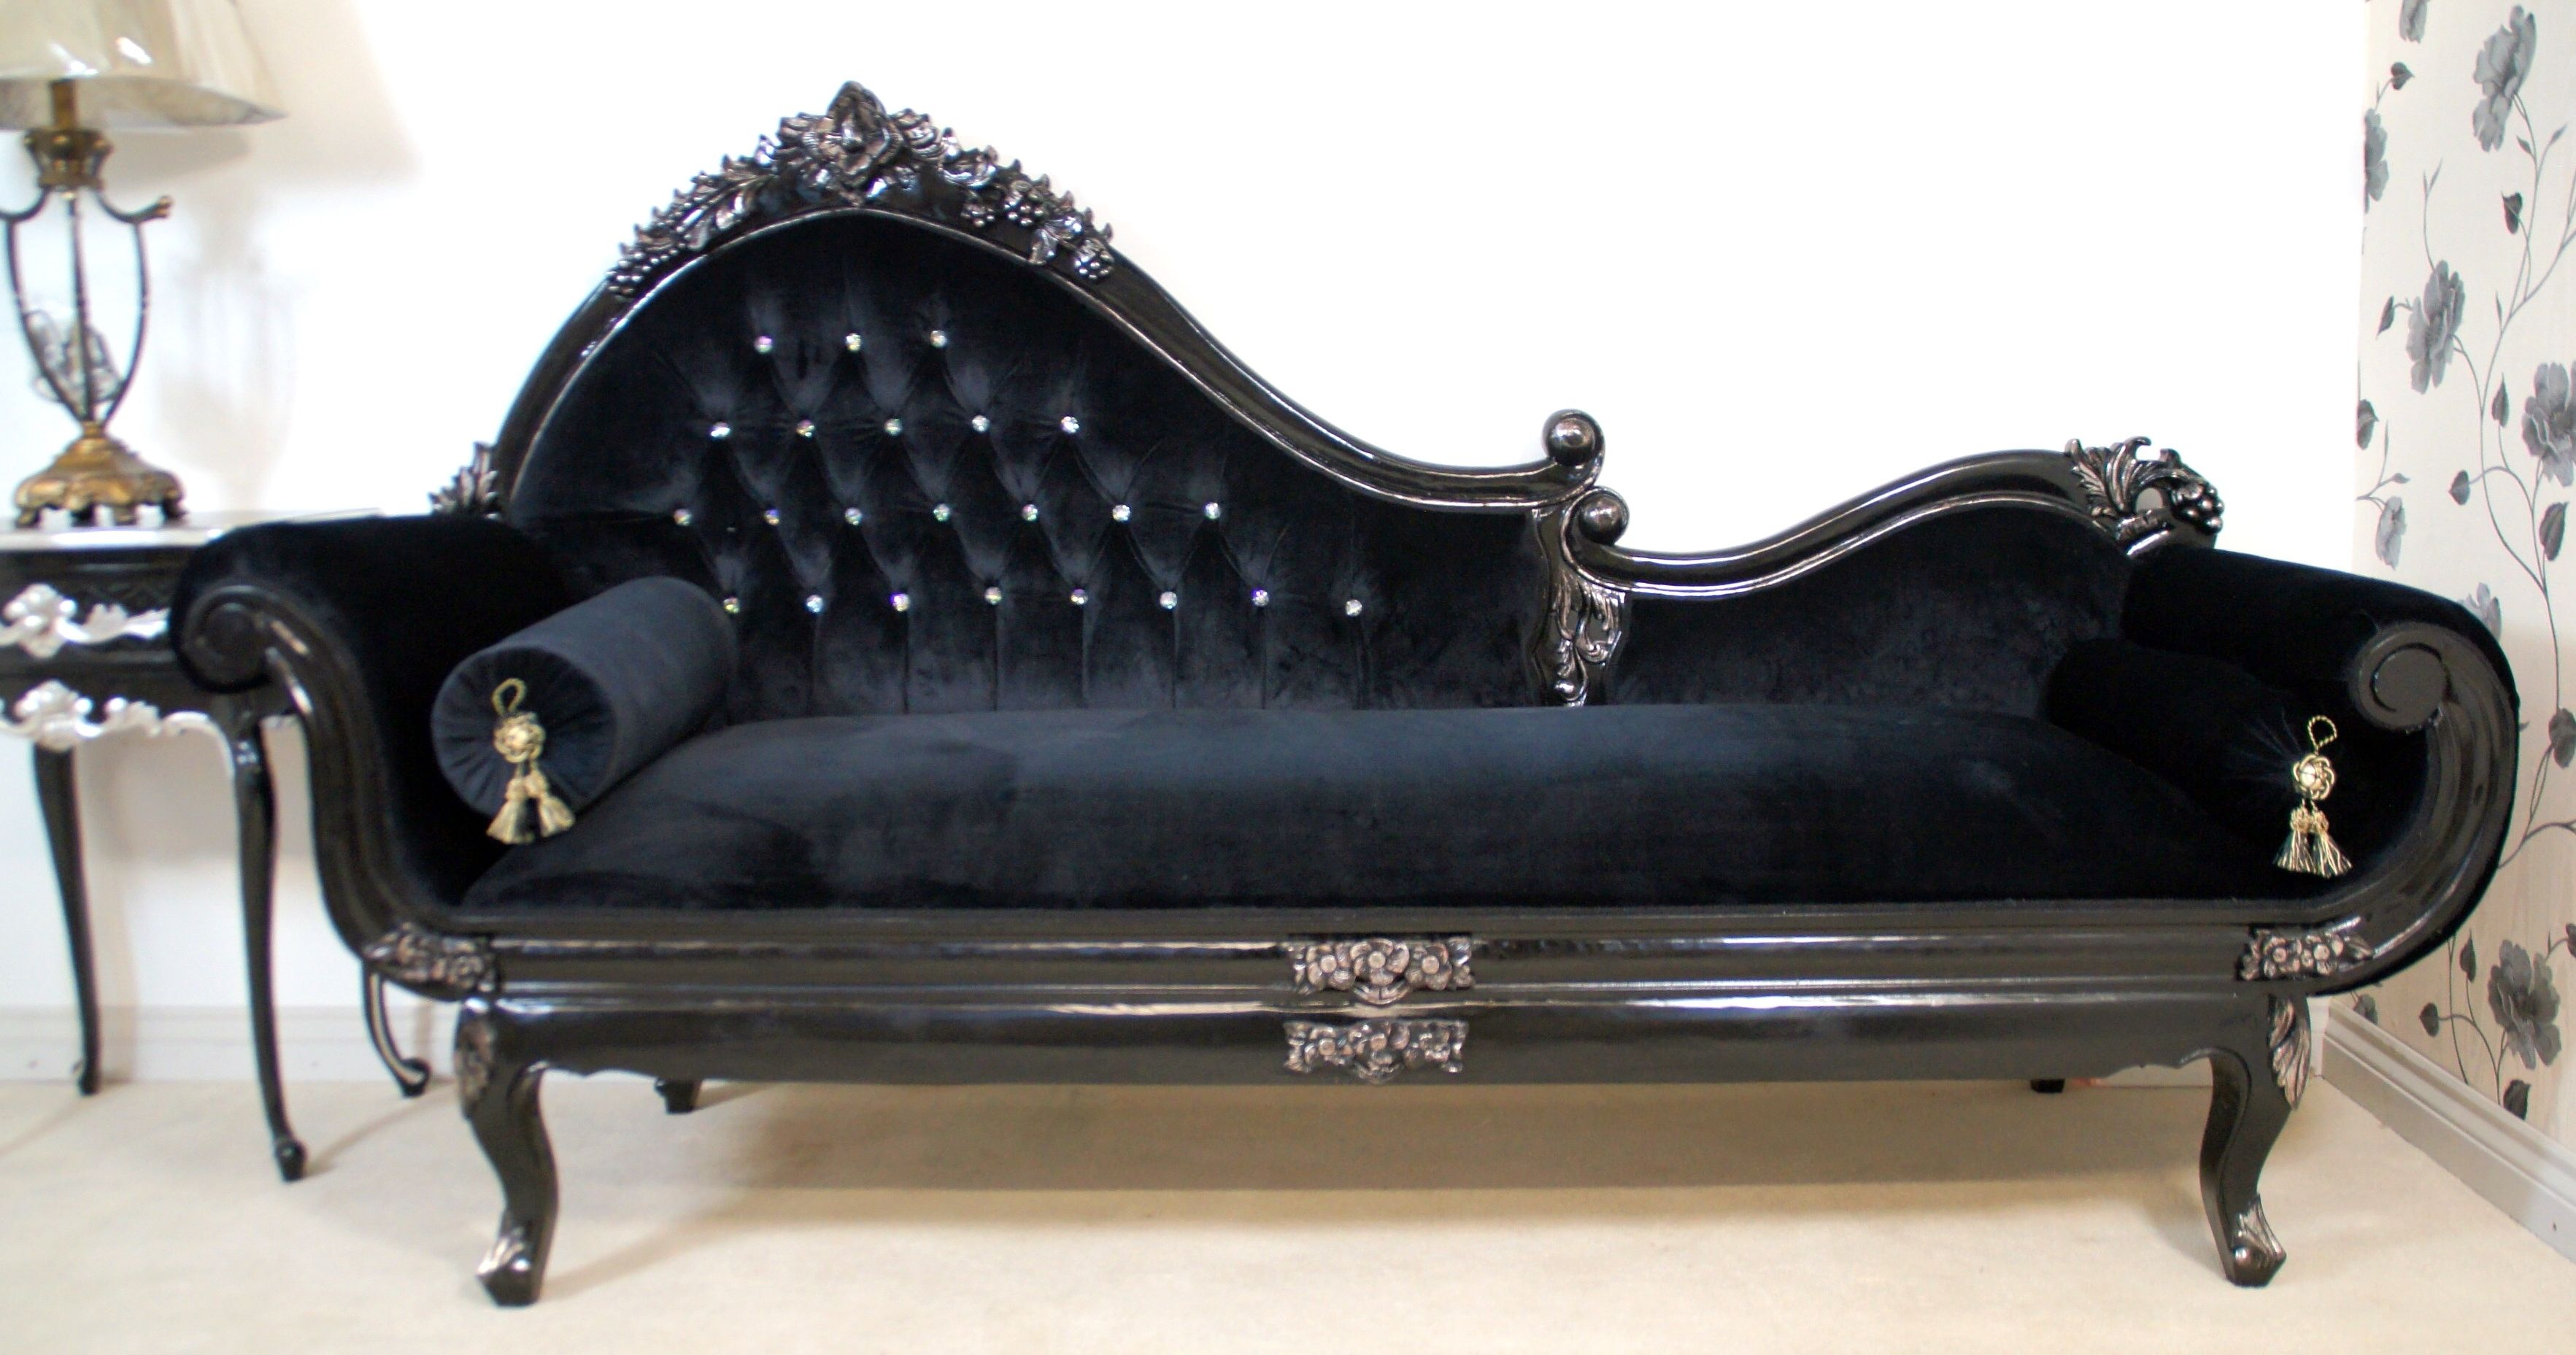 Widely Used Classic Chaise Lounge Design Come With Custom Diamond Button Throughout Velvet Chaise Lounges (View 13 of 15)